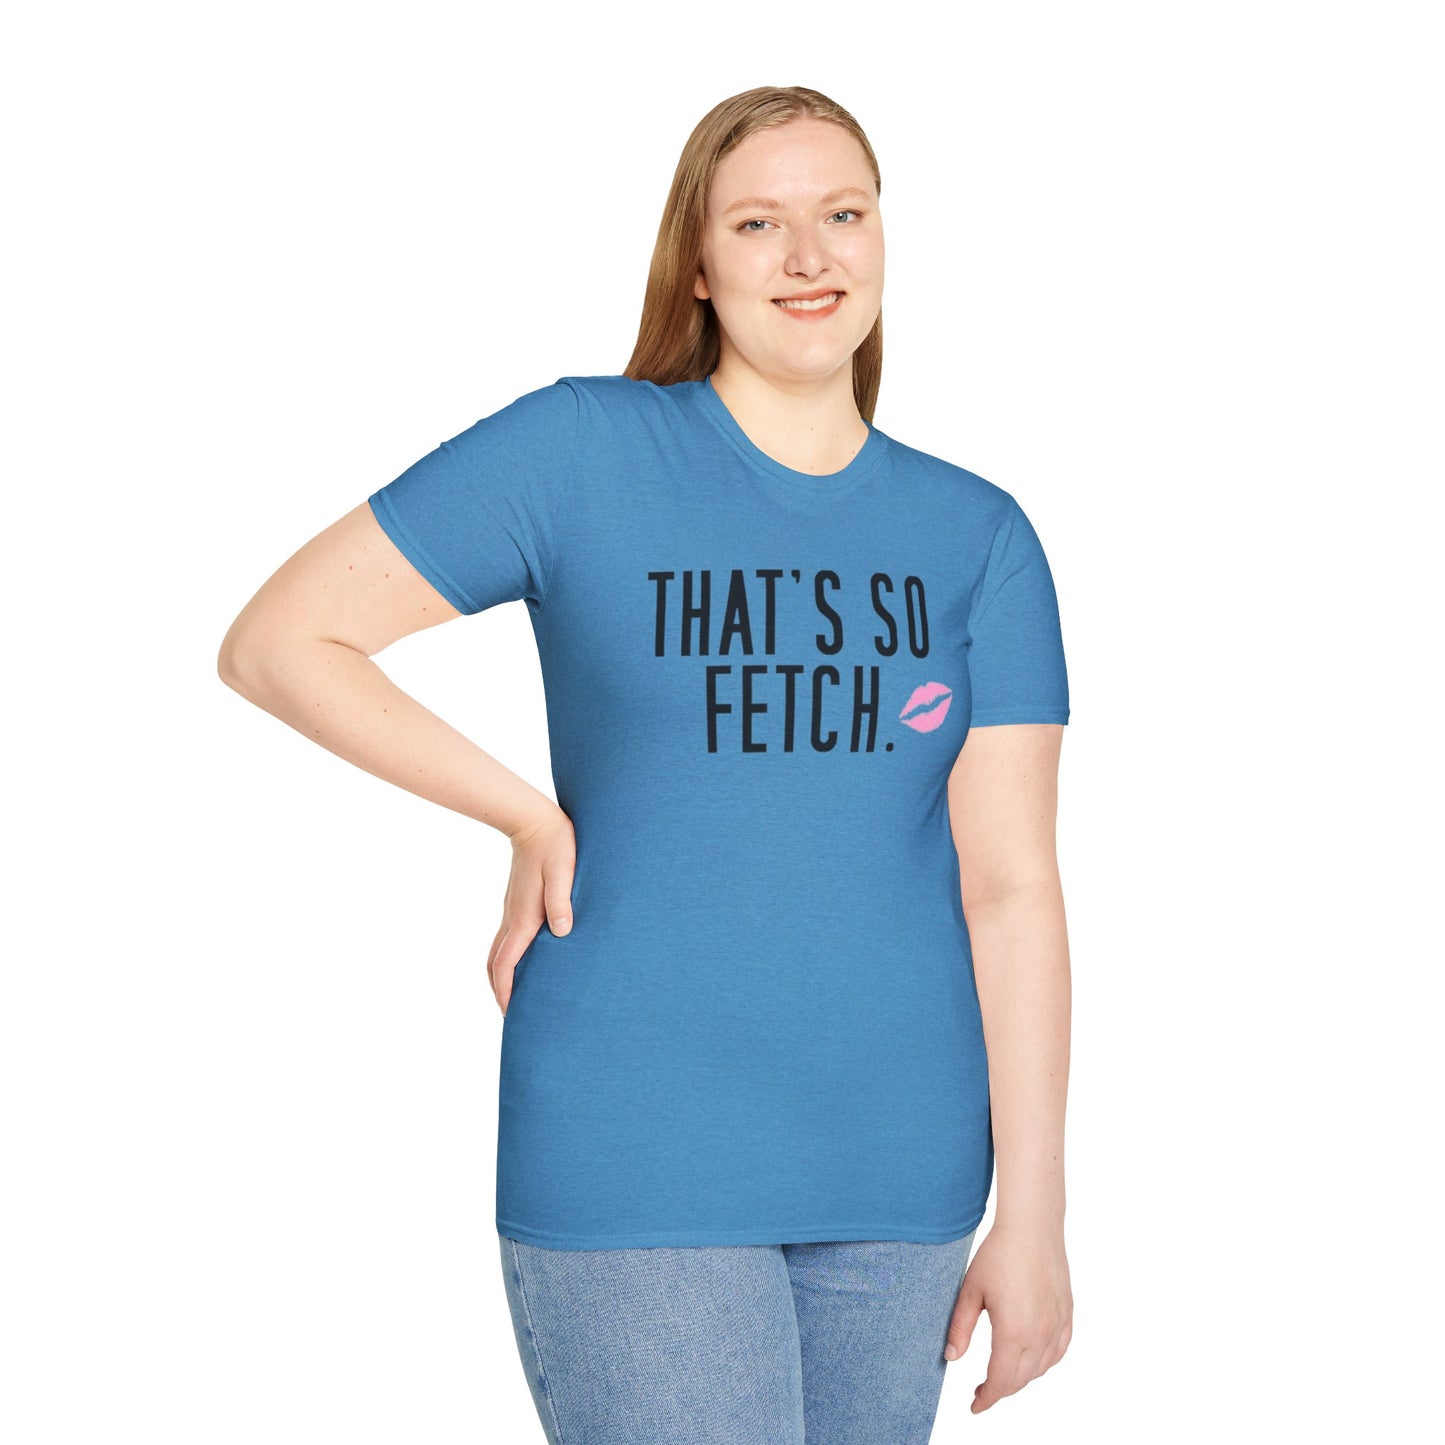 Thats so fetch - Unisex Softstyle T-Shirt